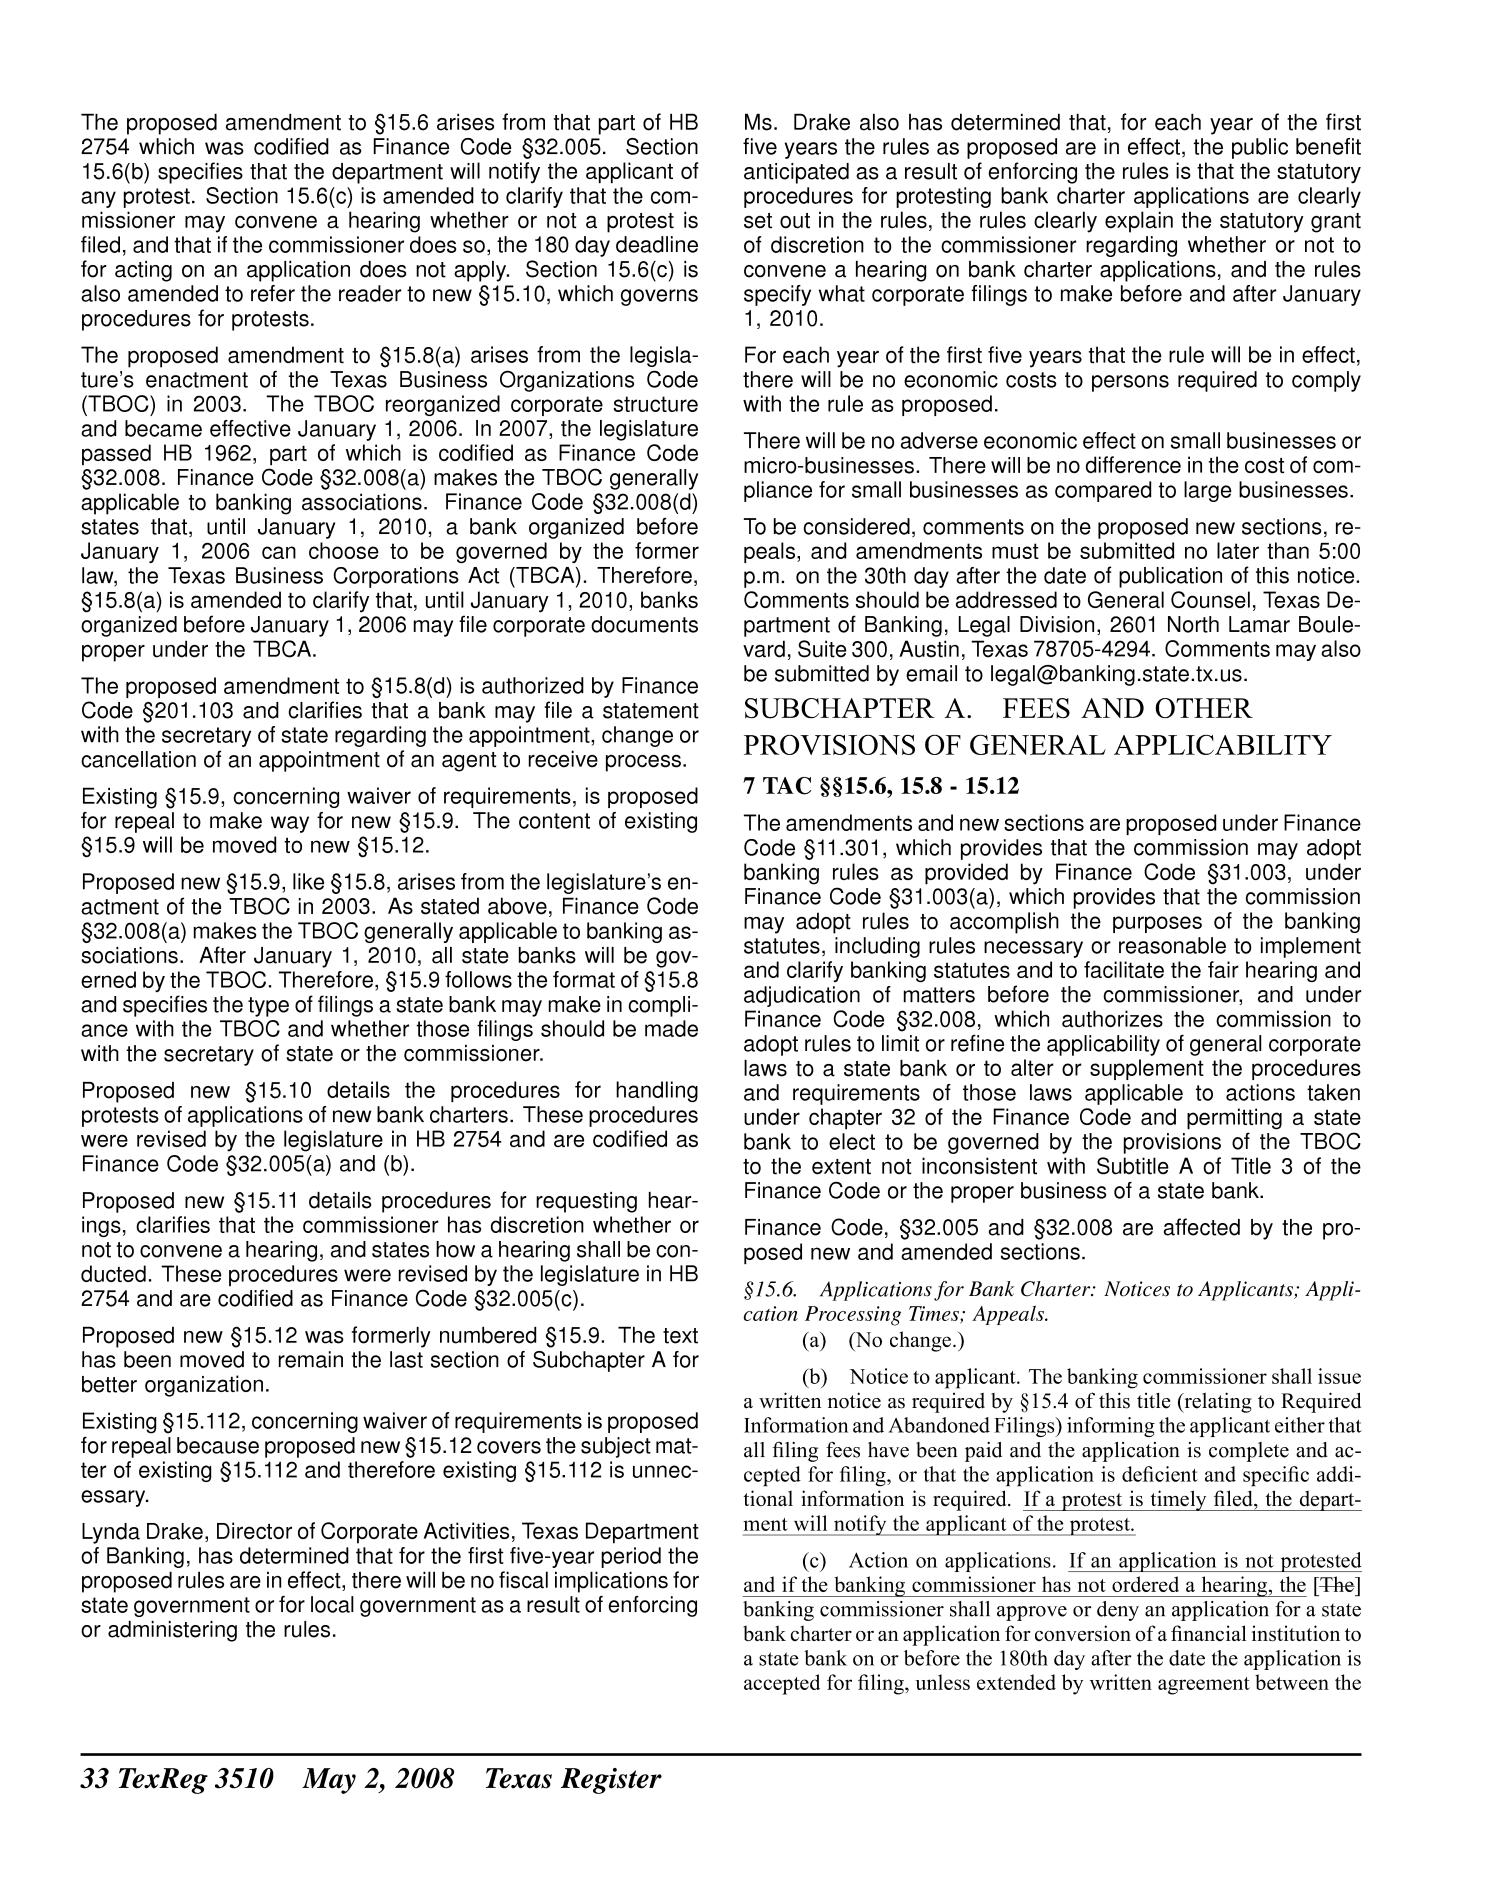 Texas Register, Volume 33, Number 18, Pages 3495-3696,   May 2, 2008
                                                
                                                    3510
                                                